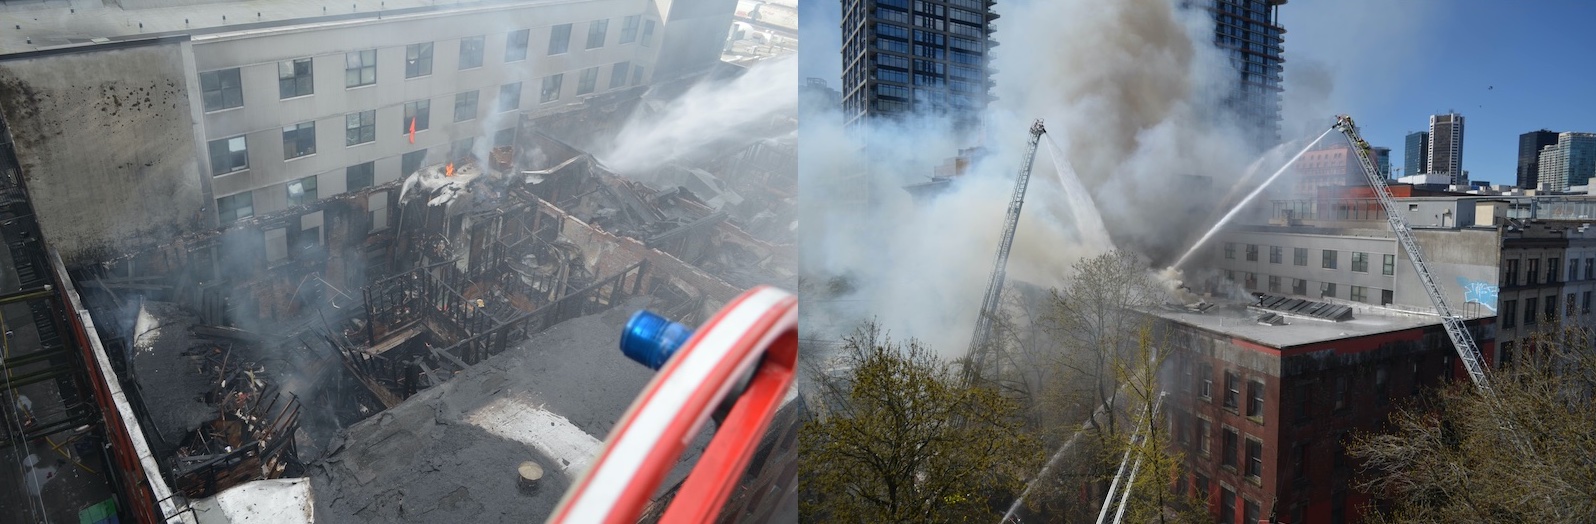 Two photos side by side. On the left is an overhead shot of the destroyed and charred interior of a building, with another structure behind it. On the right, smoke billows from a building as towering ladders are used to send streams of water into the fire.